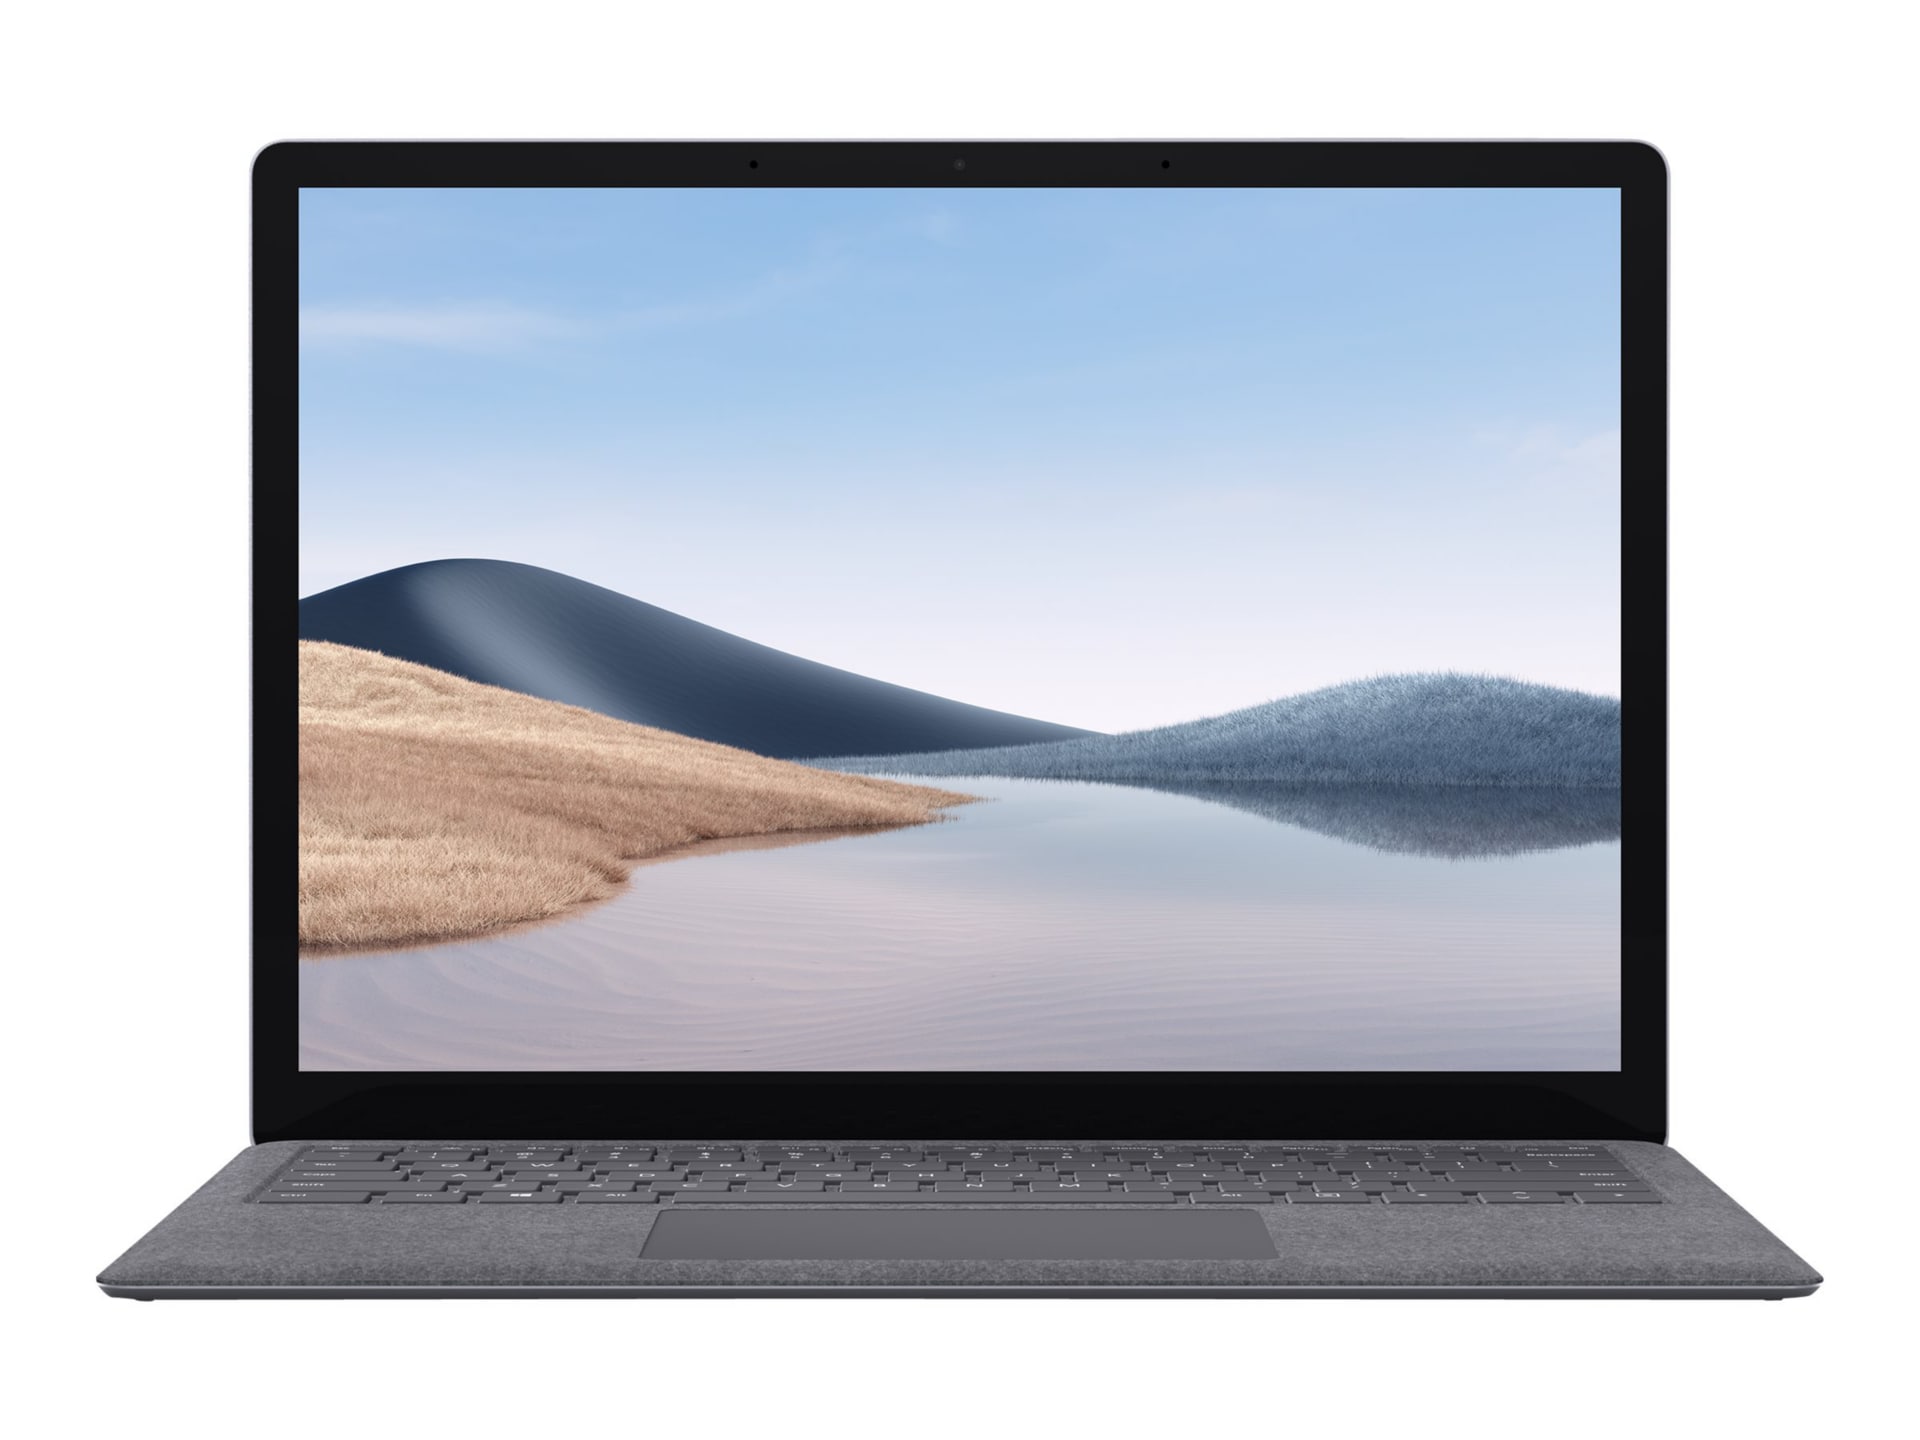 Microsoft Surface Laptop 4 for Business - 15" - Intel Core i7 - 1185G7 - 8